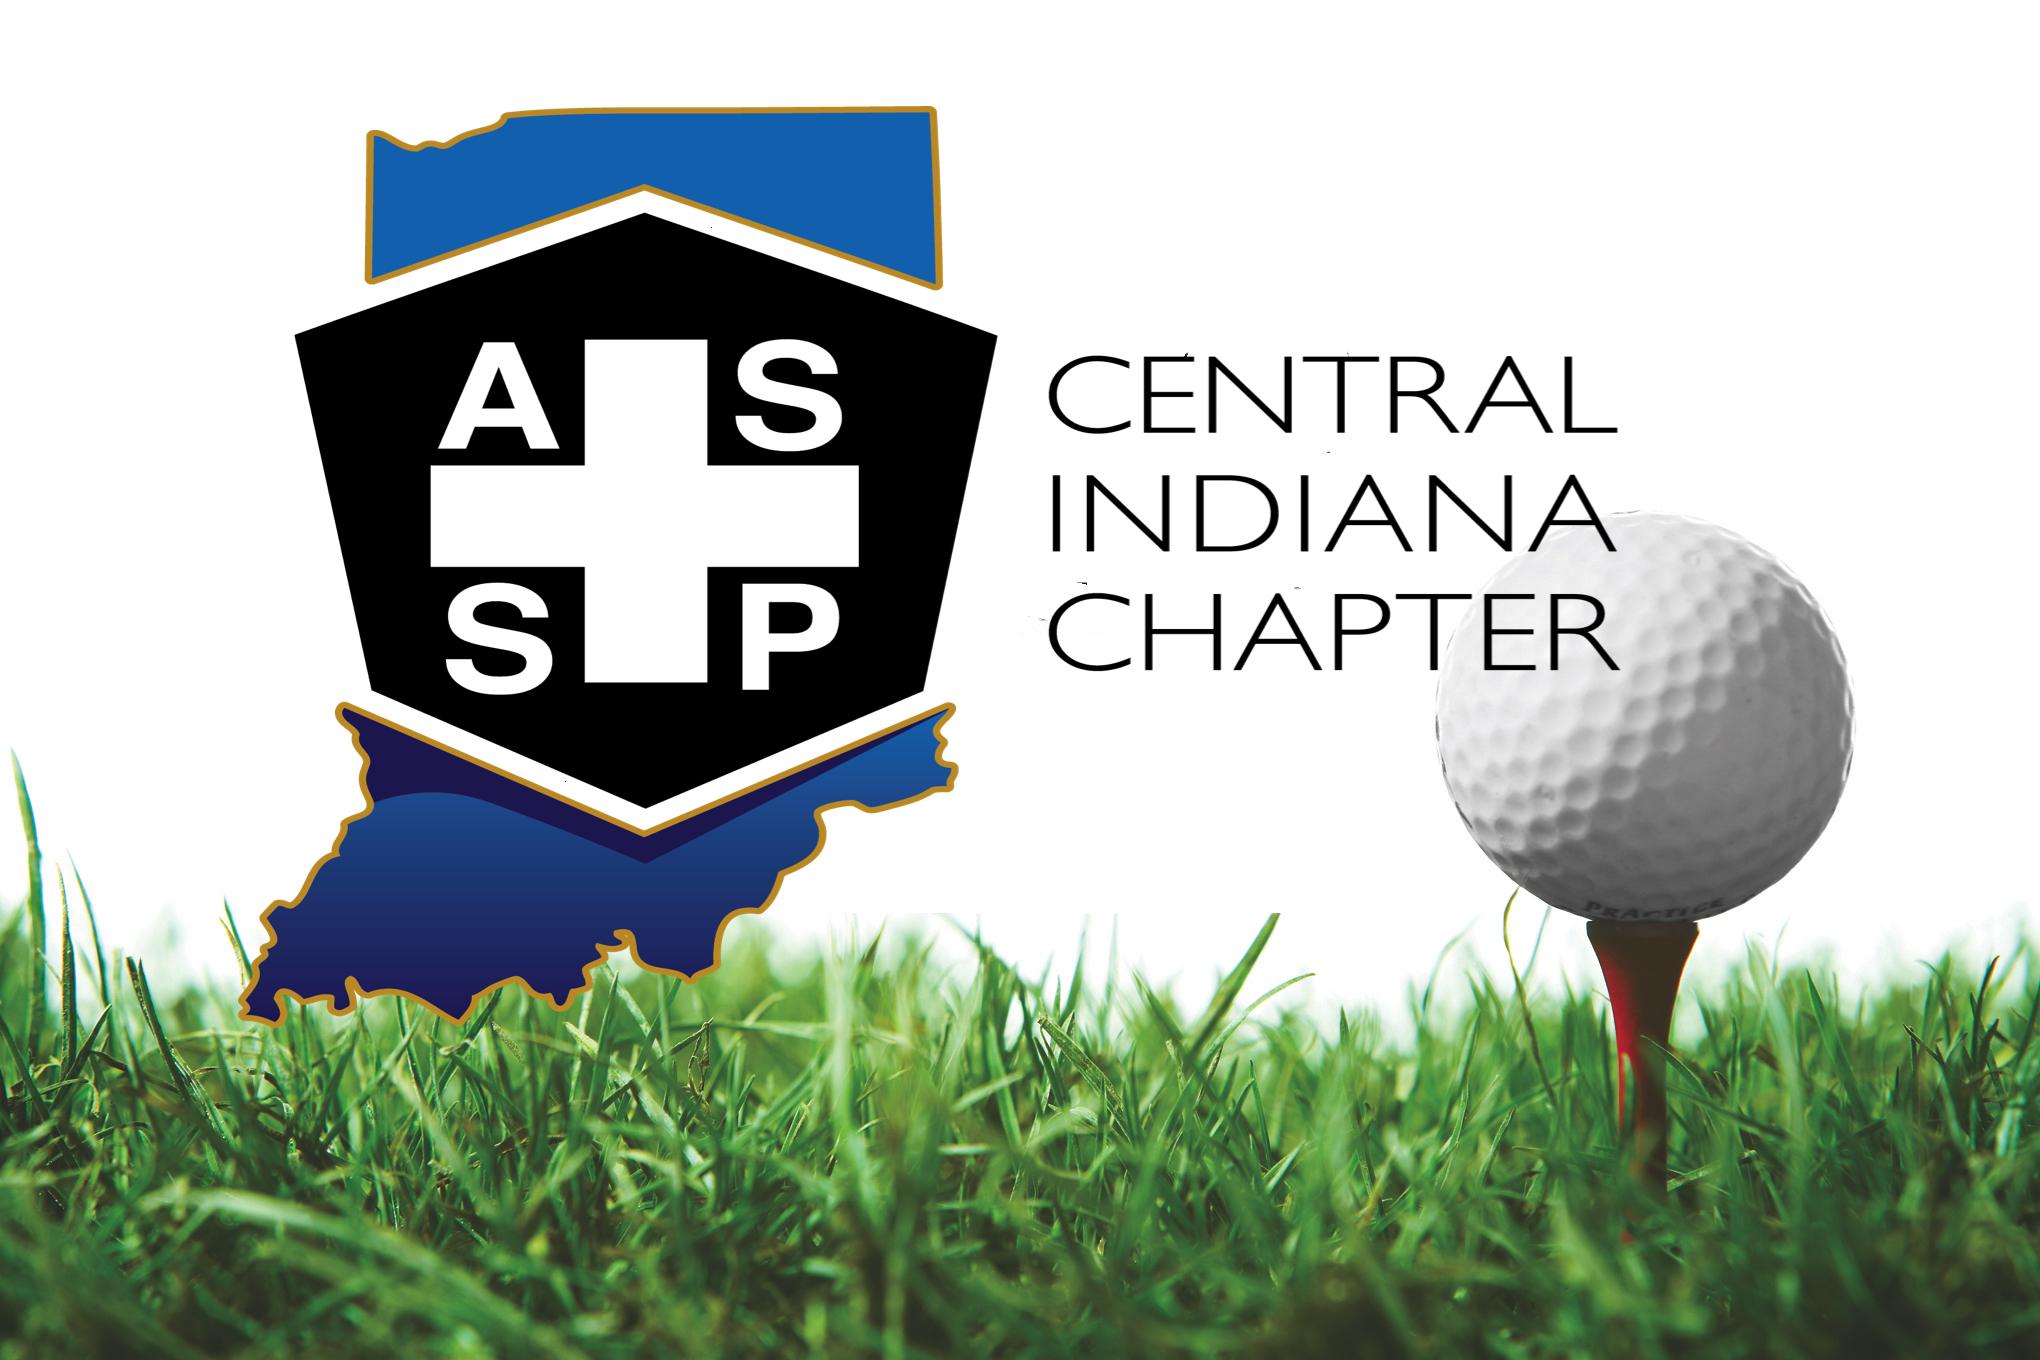 8th Annual Scholarship Golf Outing - Future Safety Leaders (August 7, 2020)